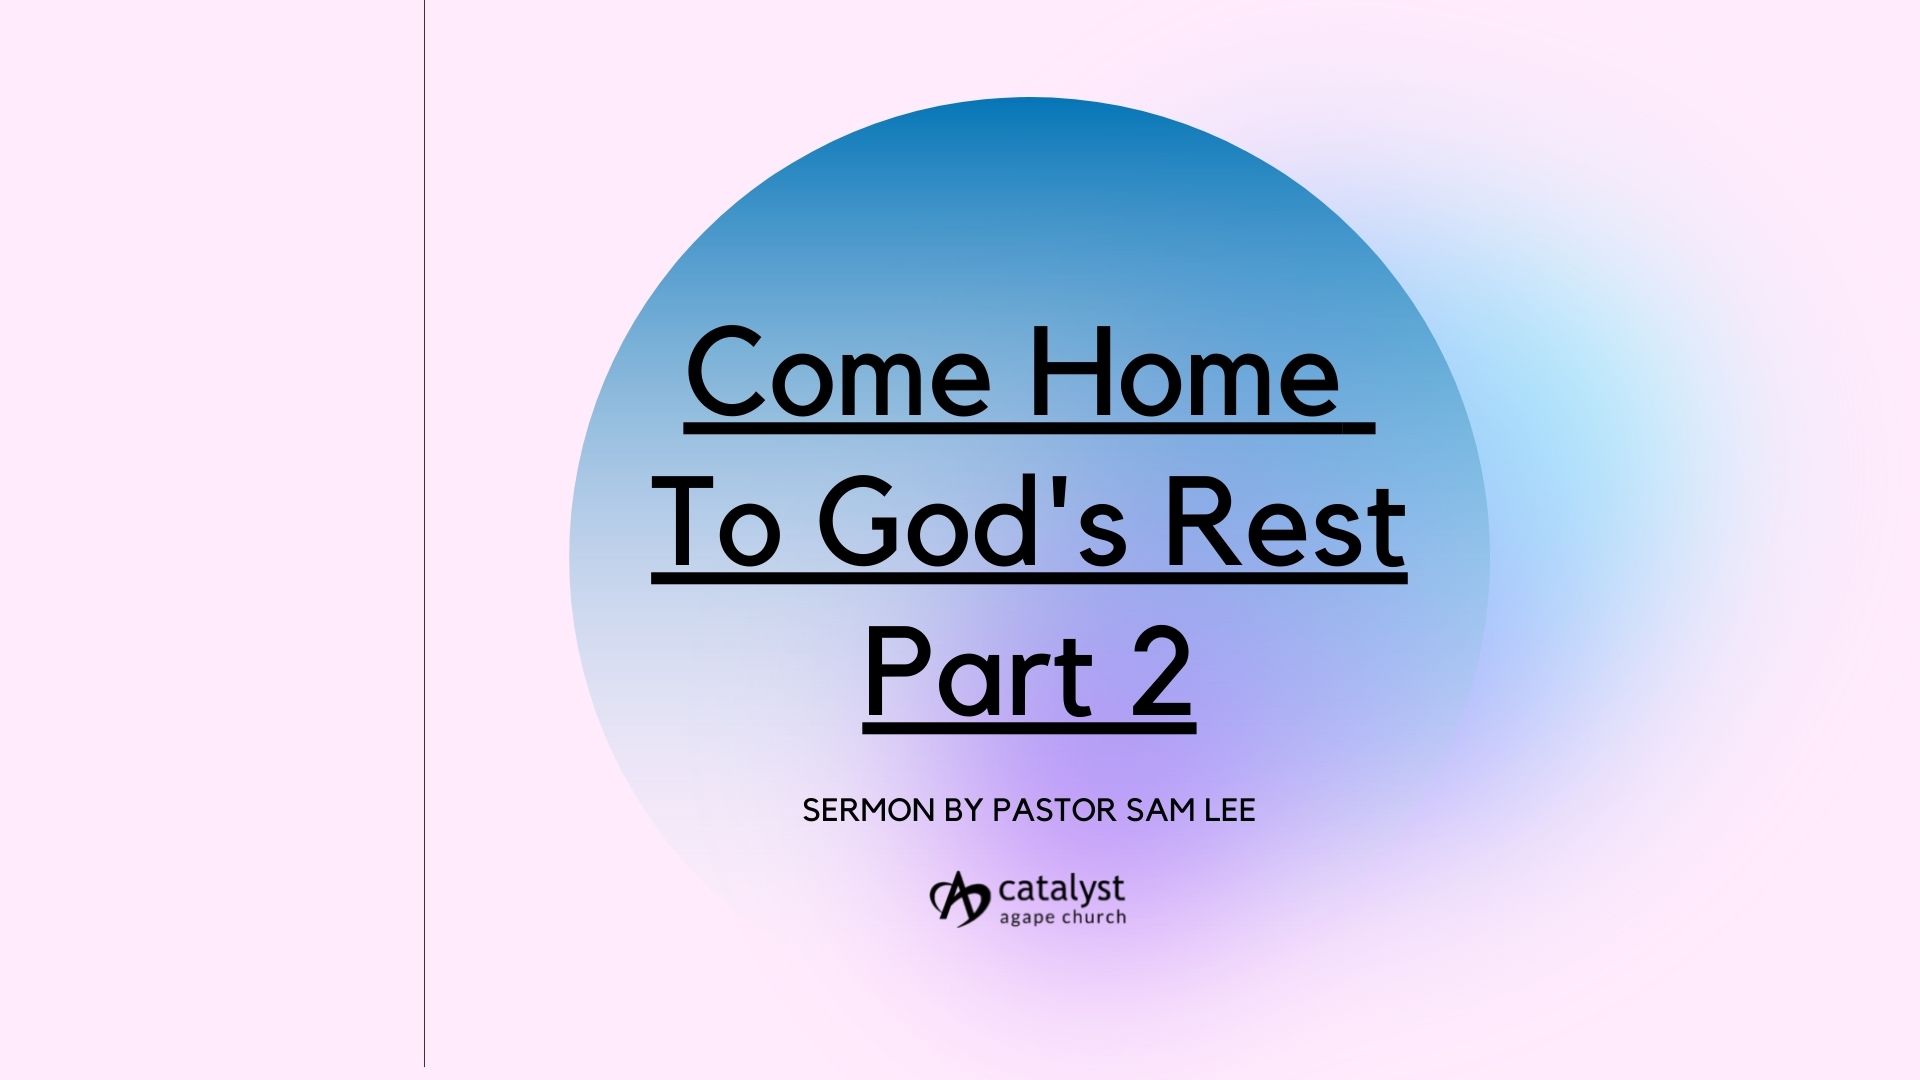 Come Home To God's Rest - Part 2